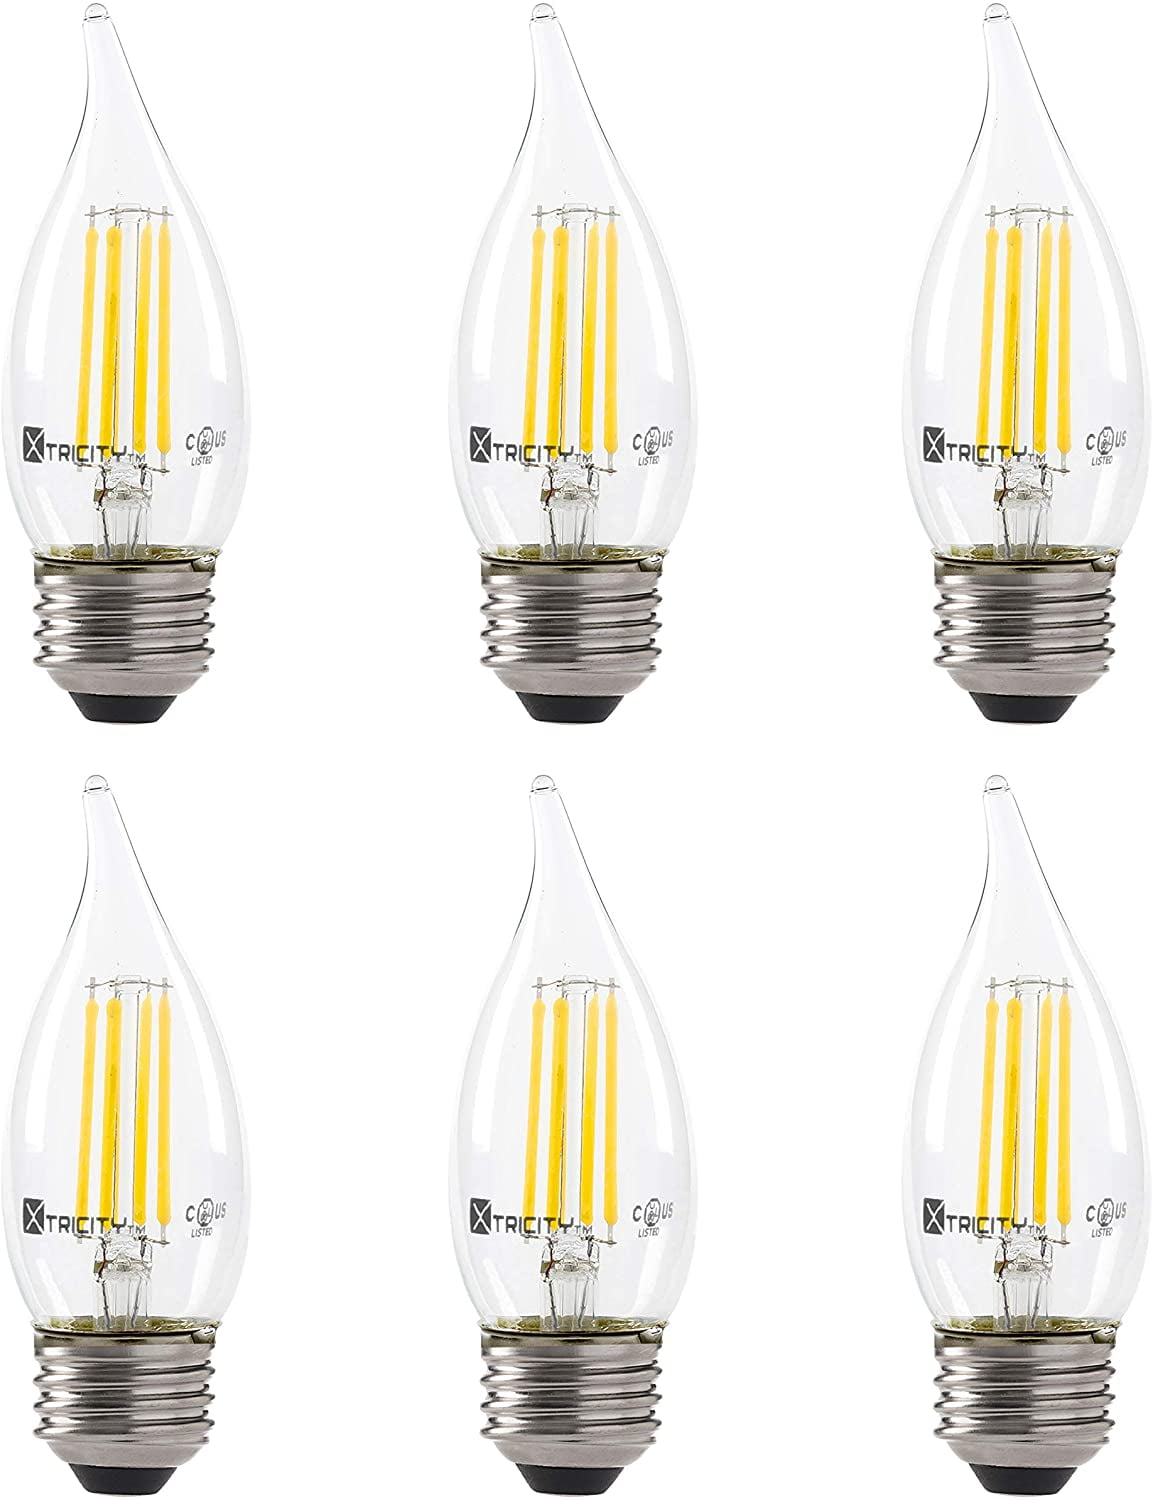 UL Listed 6 Watts 120 Volt Xtricity LED Candelabra Filament Flame Tip Frosted Bulb Pack of 6 E26 Medium Base 3000K Soft White Dimmable Candle Led Bulb 60 Watt Equivalent